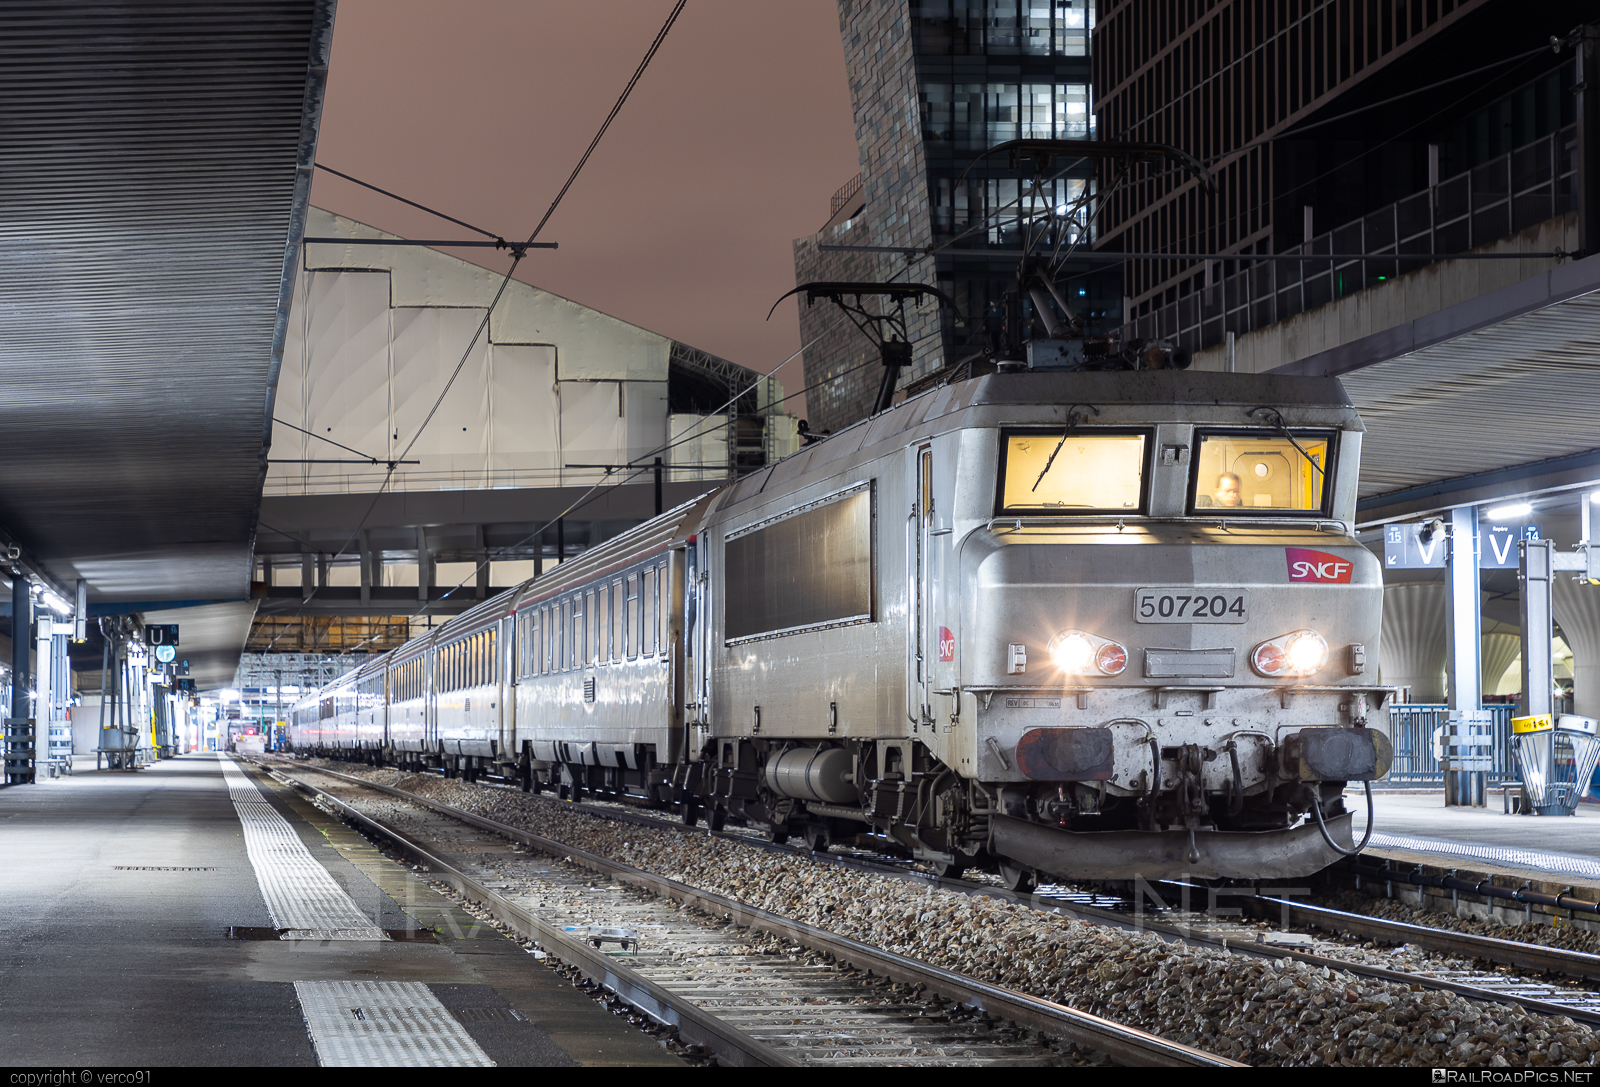 SNCF Class BB 7200 - 507204 operated by SNCF Voyageurs #nezCasse #sncf #sncfClassBb7200 #sncfVoyageurs #sncfvoyageurs